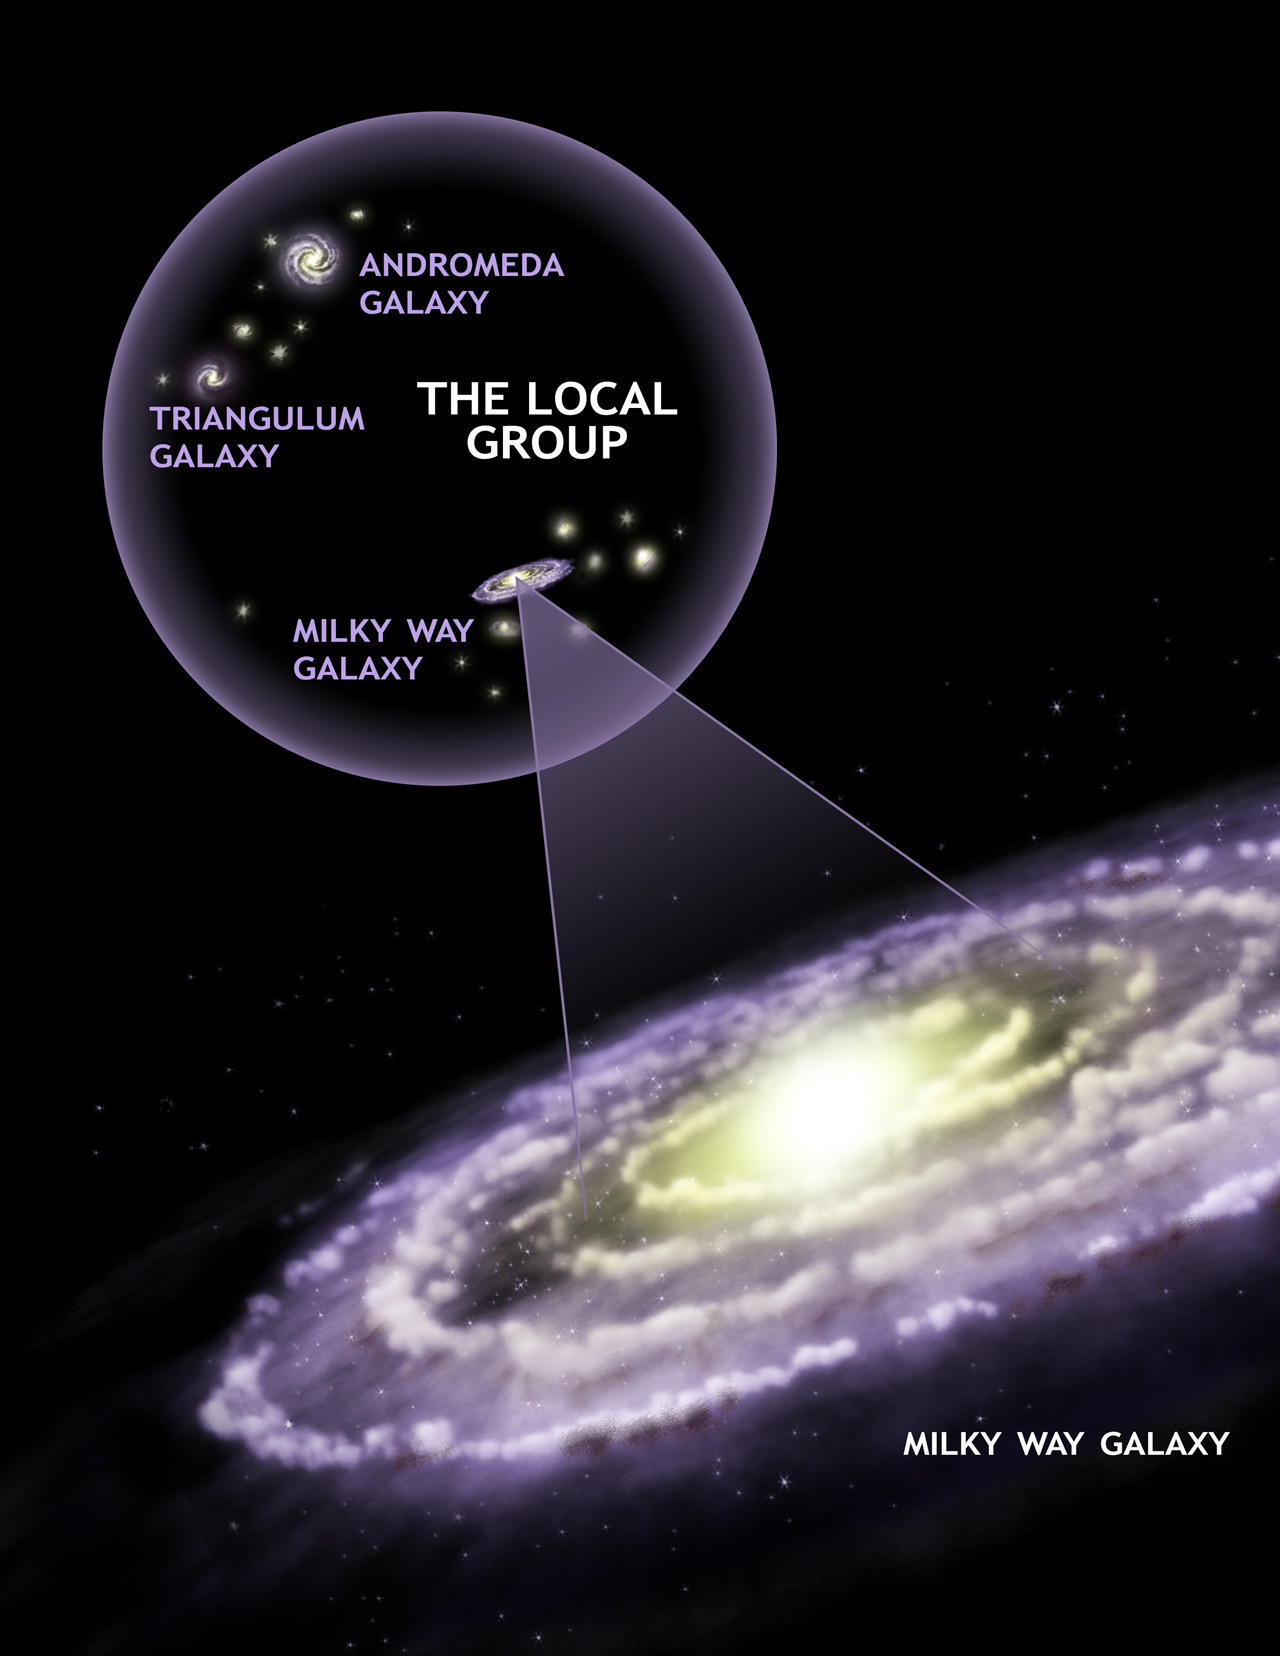 The Milky Way is not an island universe, but a member of a small cluster of galaxies called the Local Group. The Local Group contains about 3 dozen known galaxies, clumped in two subgroups around two massive spiral galaxies -- the Milky Way, and the Andromeda Galaxy. In several billion years it is possible that the Milky Way and Andromeda will collide and merge to form one huge elliptical galaxy. (Credit: NASA/CXC/M.Weiss)